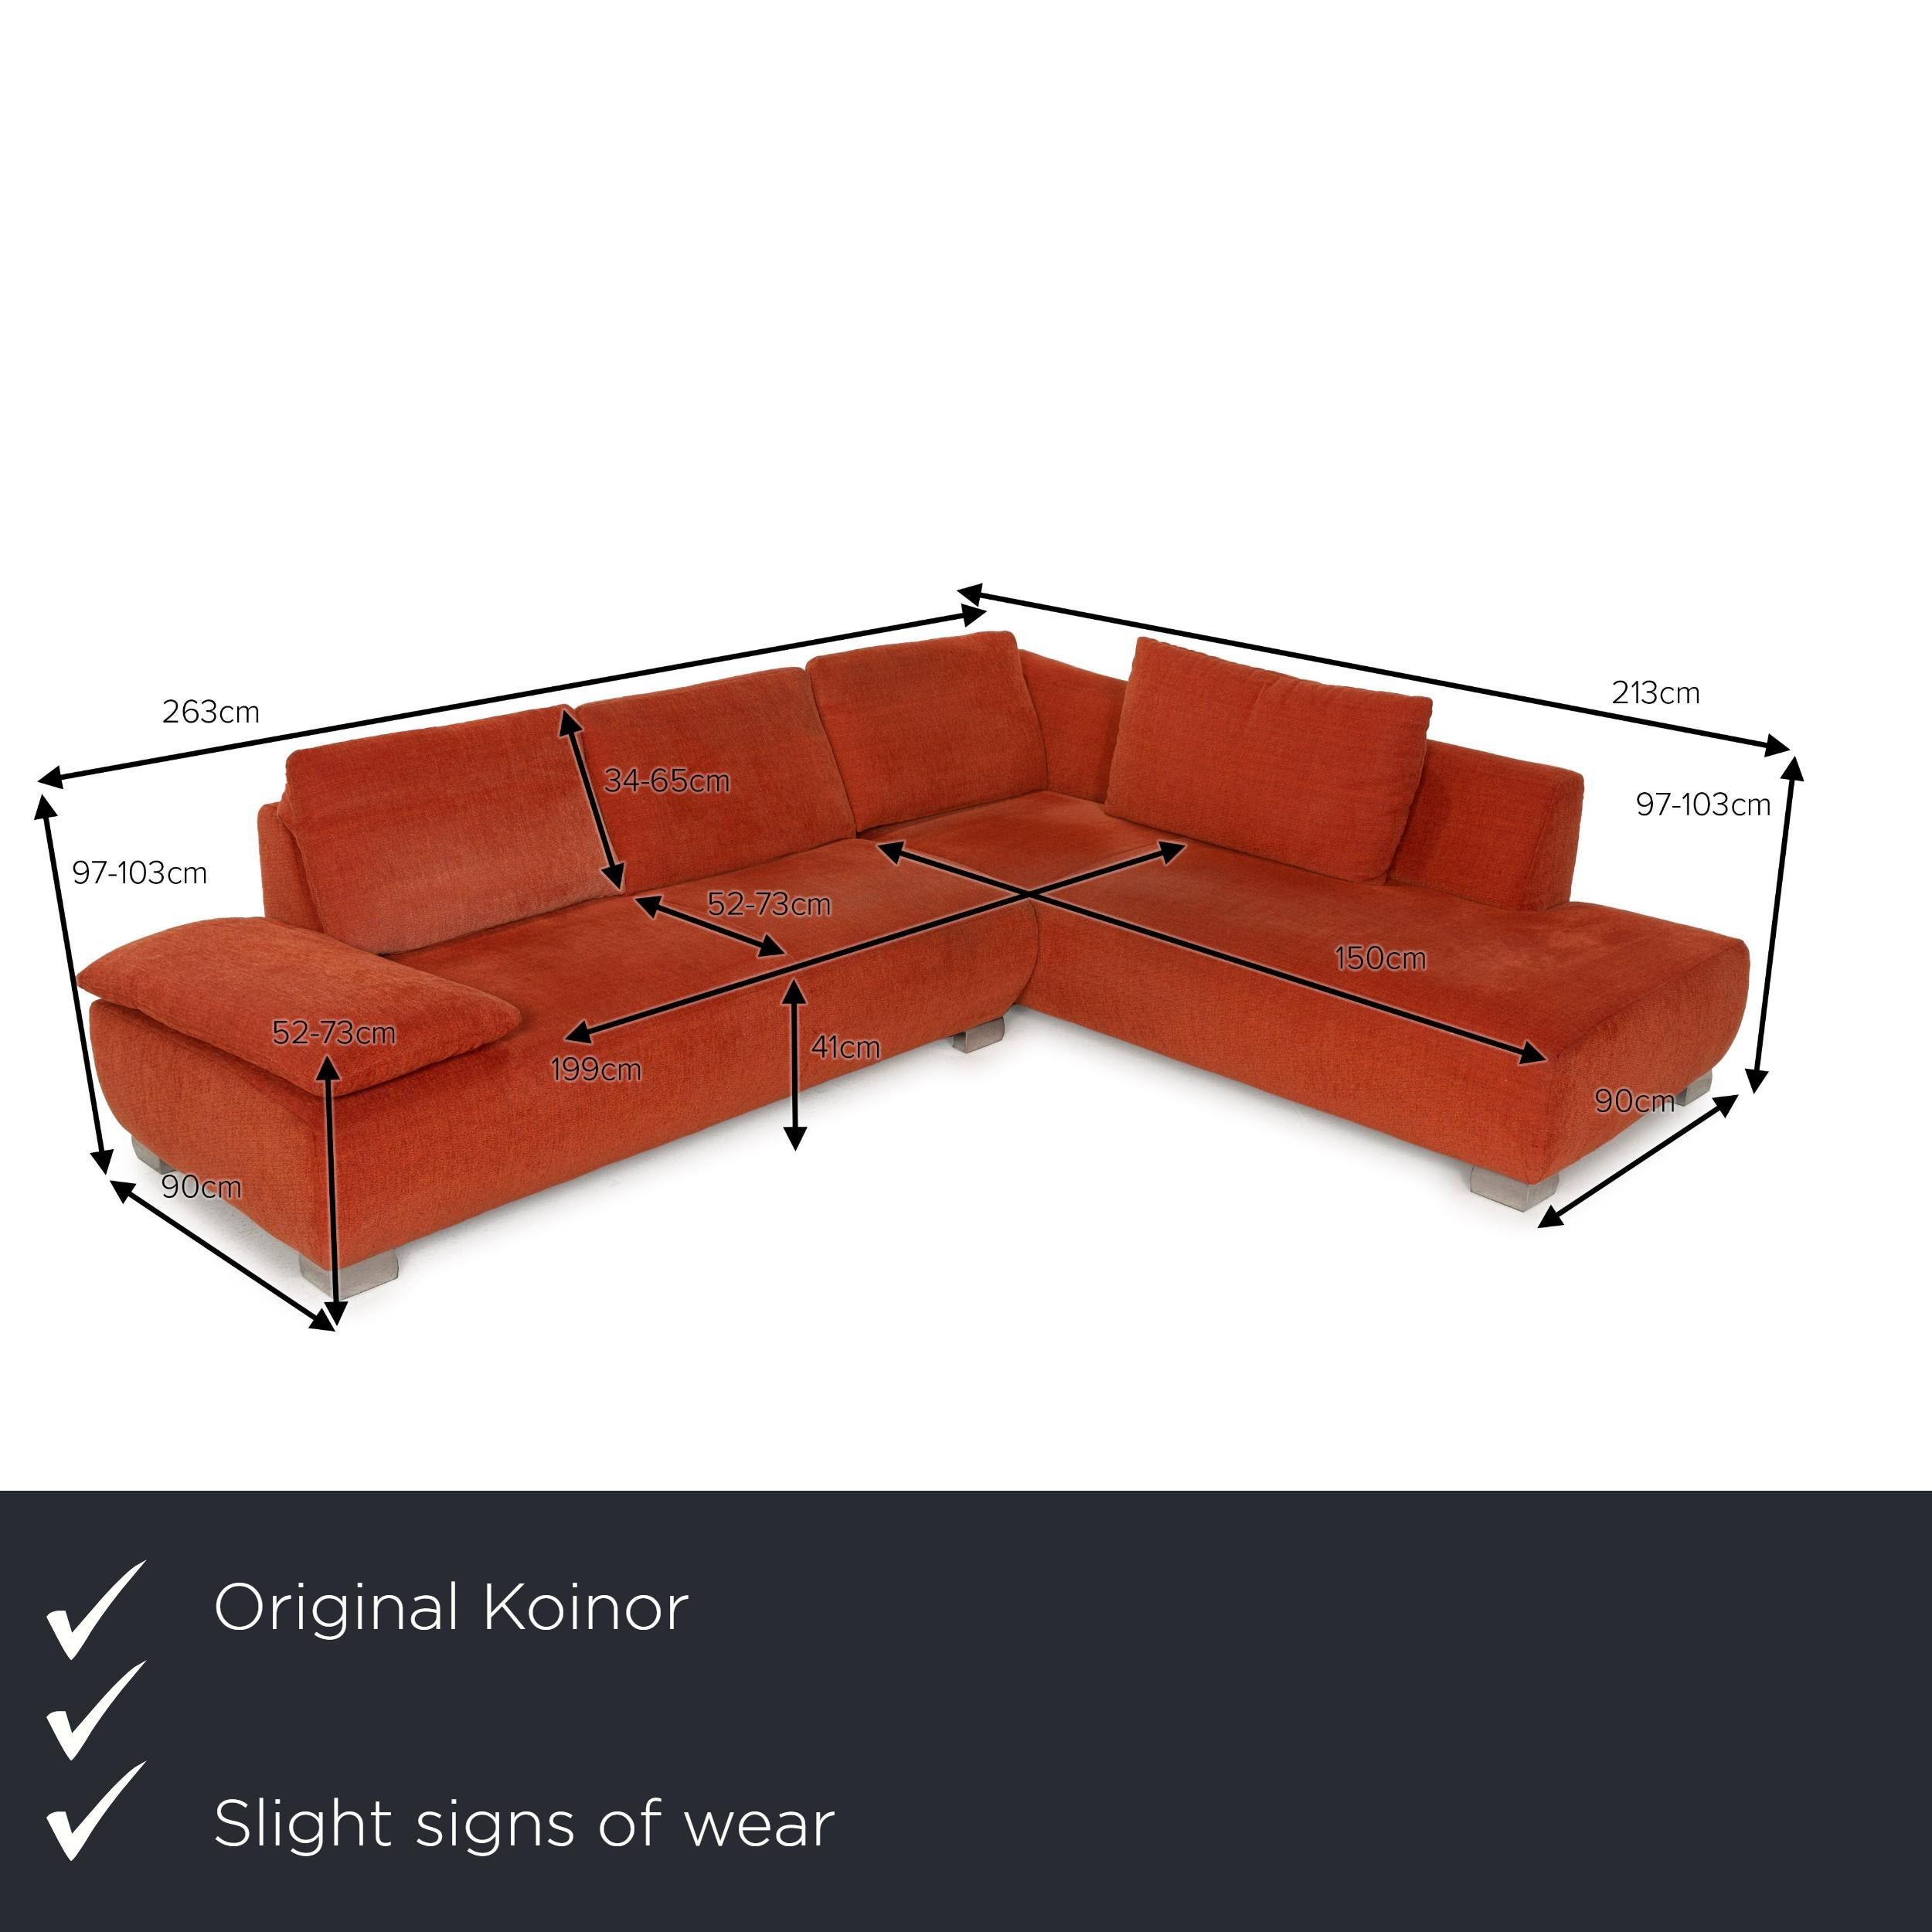 We present to you a Koinor Volare fabric sofa orange corner function.

Product measurements in centimeters:

Depth 90
Width 263
Height 97
Seat height 41
Rest height 52
Seat depth 53
Seat width 199
Back height 34.
 
 
  
  